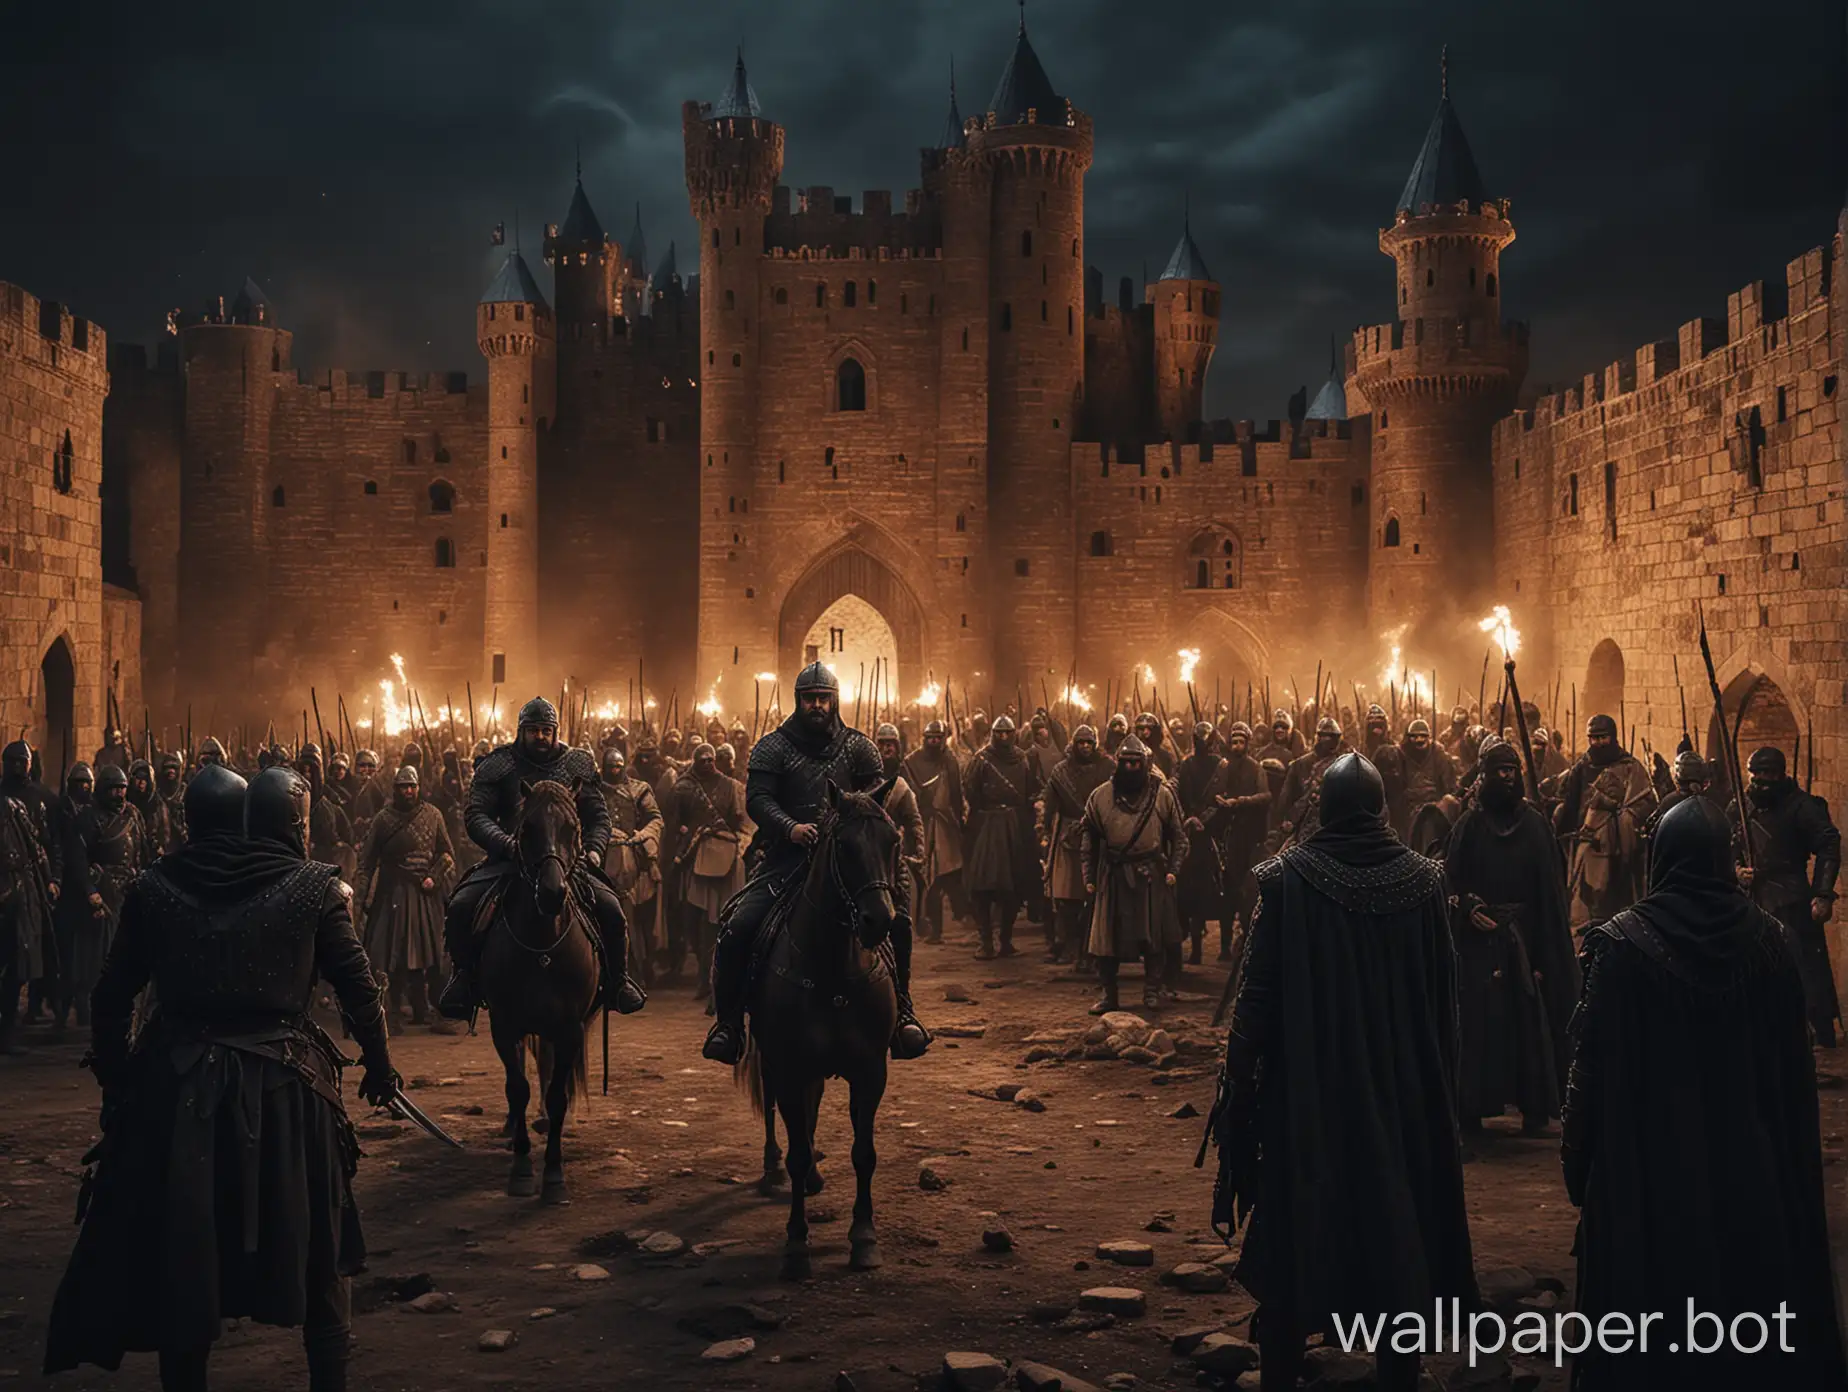 A heroic scene of Ertugrul Ghazi fighting alone against 100 of night templar in a castle at evening. Cinematic scene